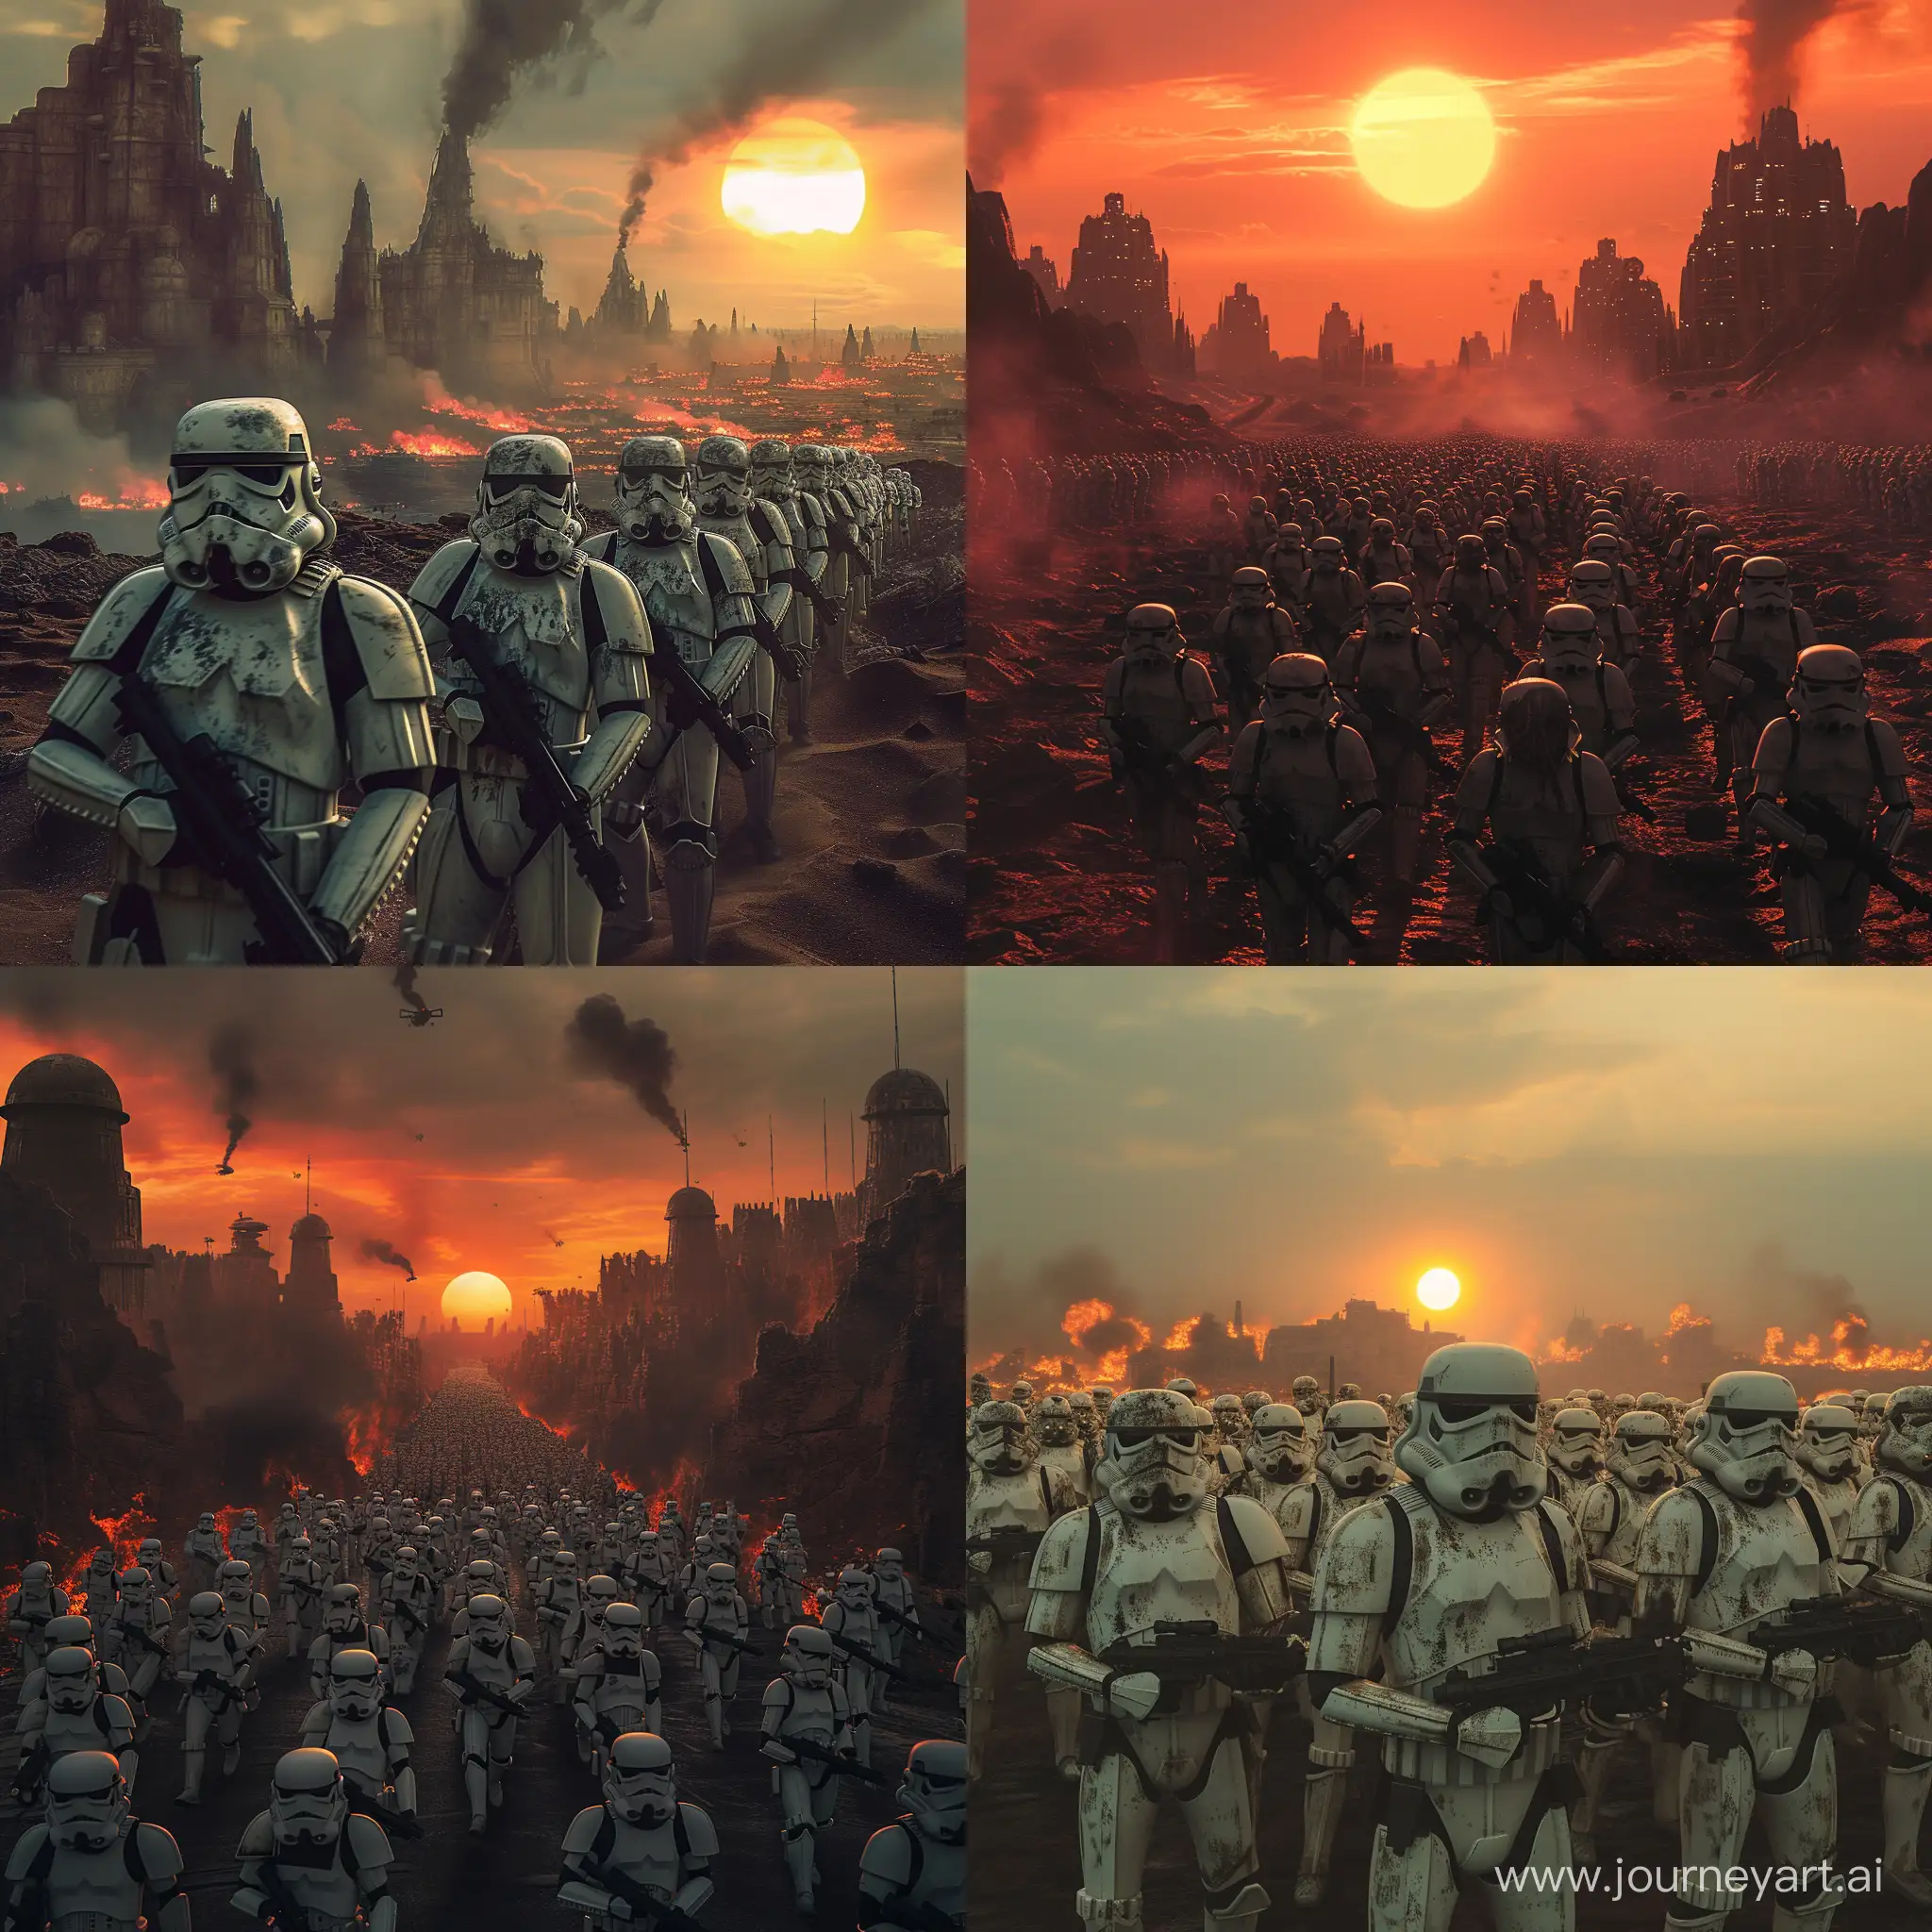 Gothic-Stormtroopers-Converge-on-City-at-Sunset